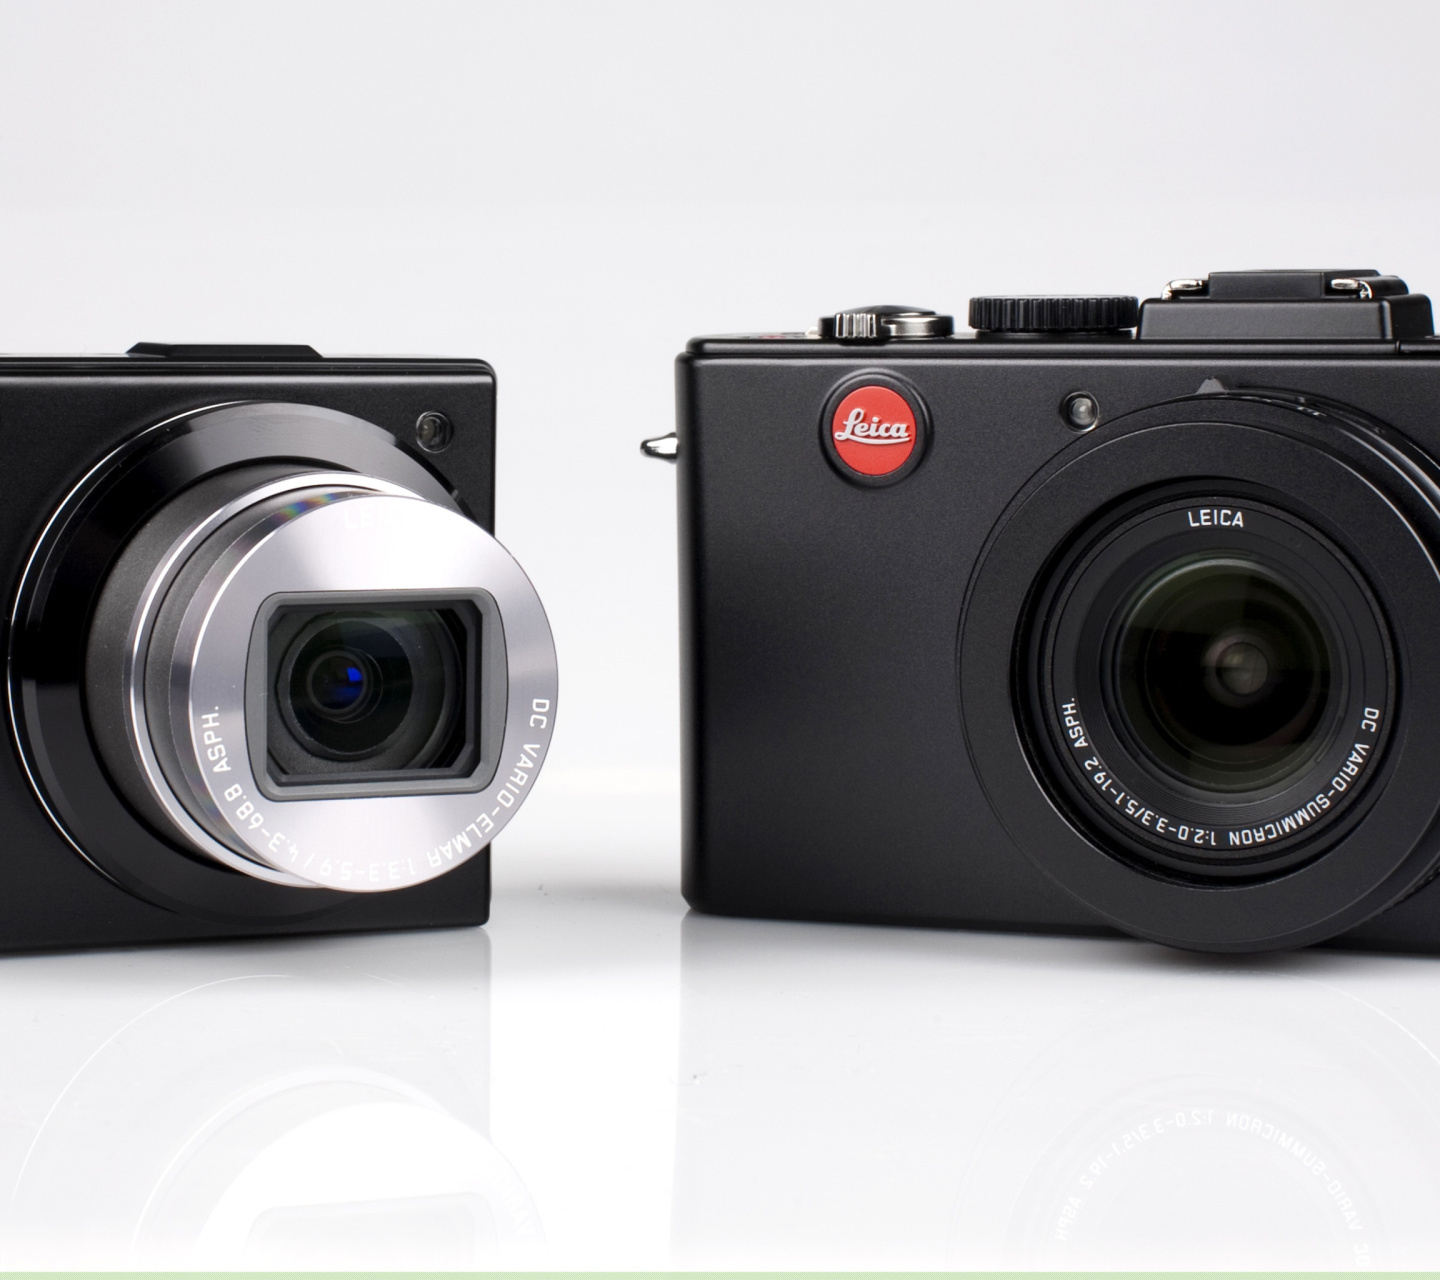 Leica D Lux 5 and Leica V LUX 1 screenshot #1 1440x1280